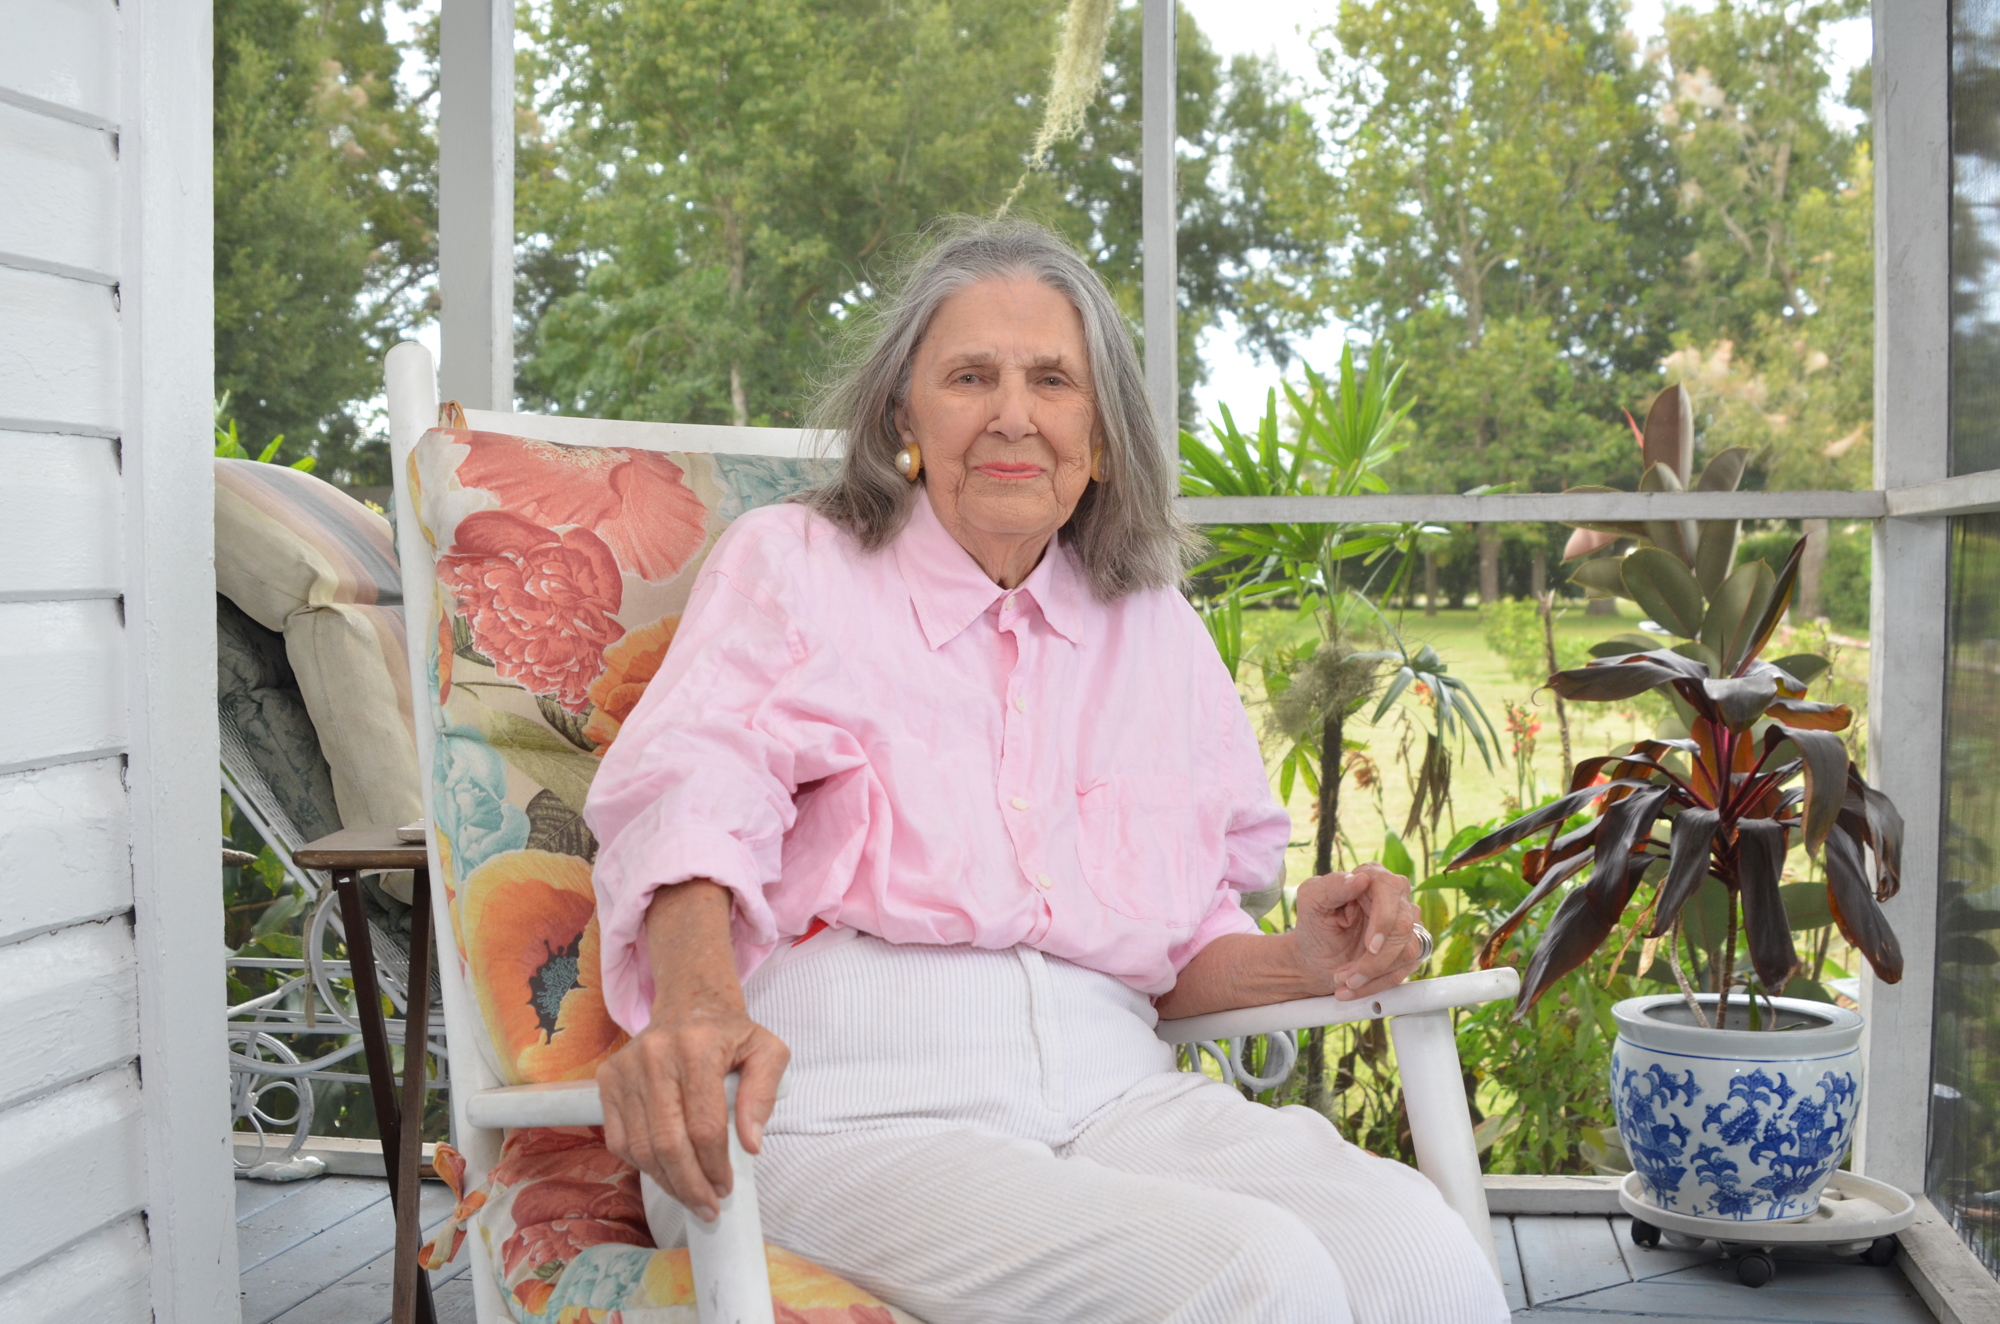 Marilee Griffin Ivy’s morning routine includes sitting on her screened-in porch and watching the activity at Ocoee Elementary School.